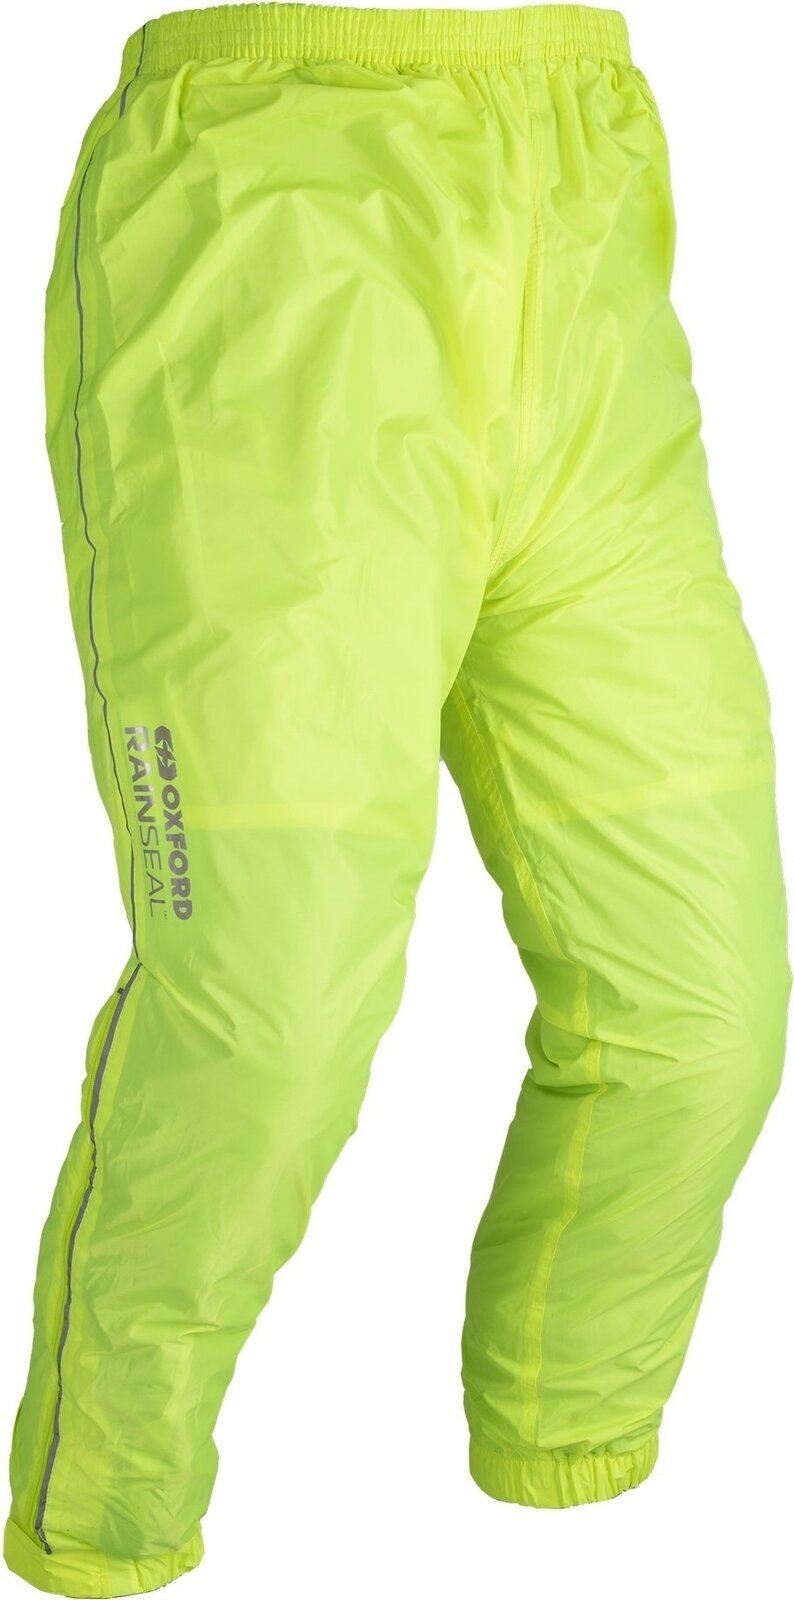 Motorcycle Rain Pants Oxford Rainseal Over Trousers Fluo XL